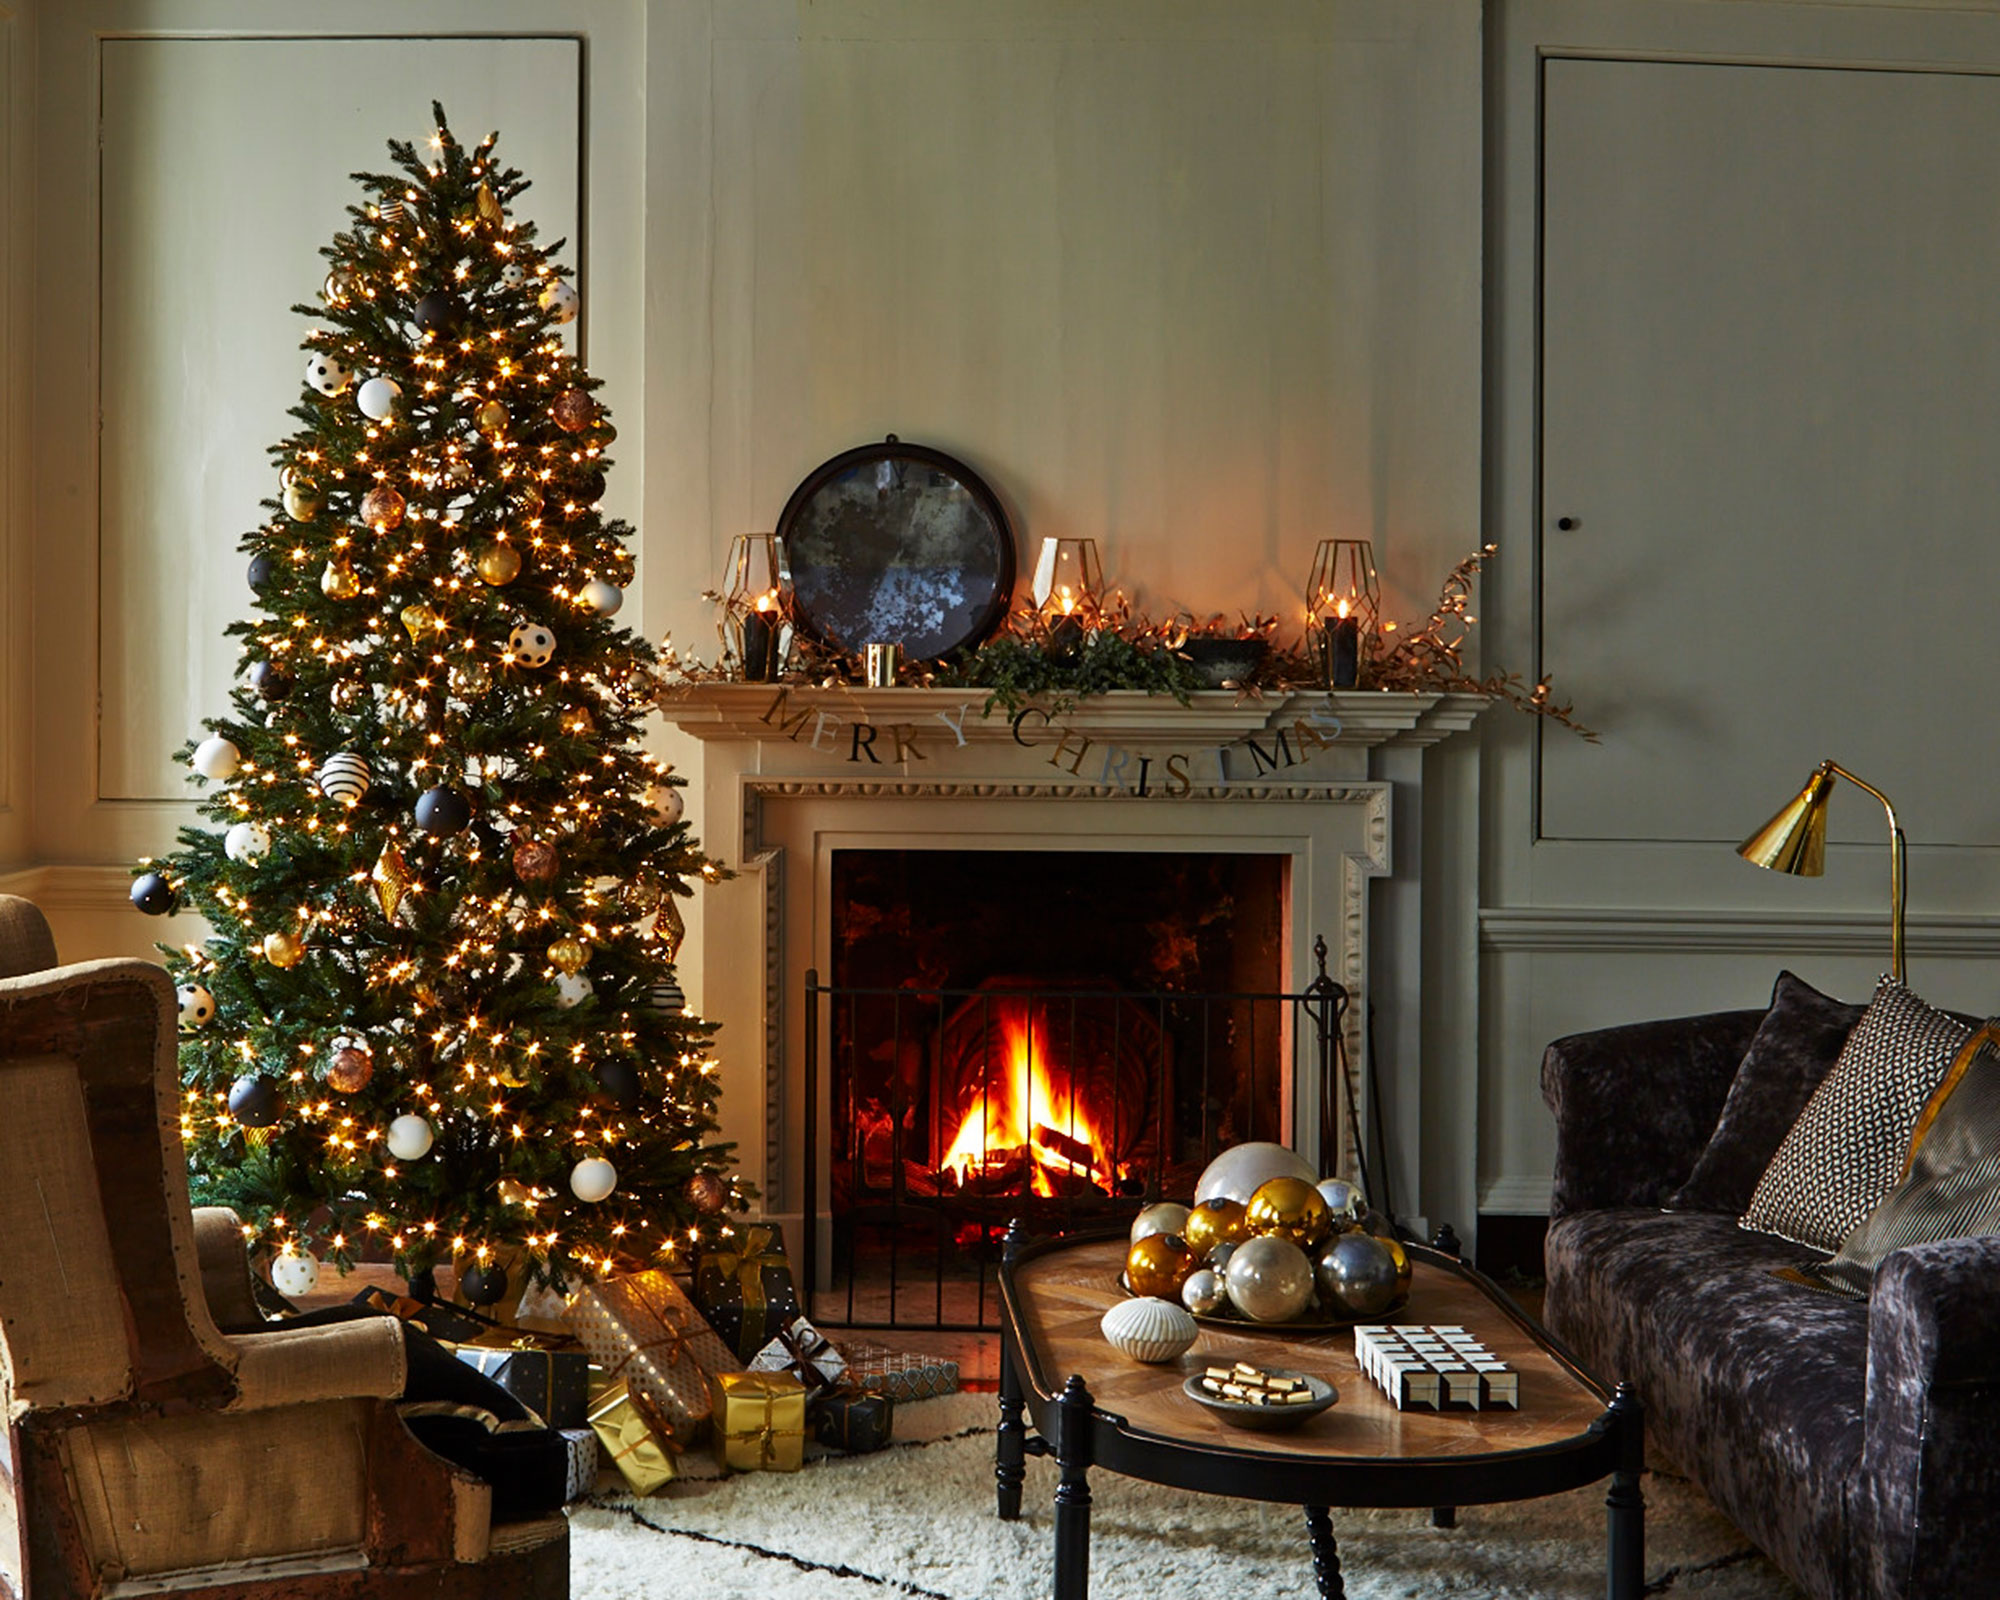 How to make a Christmas tree look fuller: 10 simple ways to increase its impact